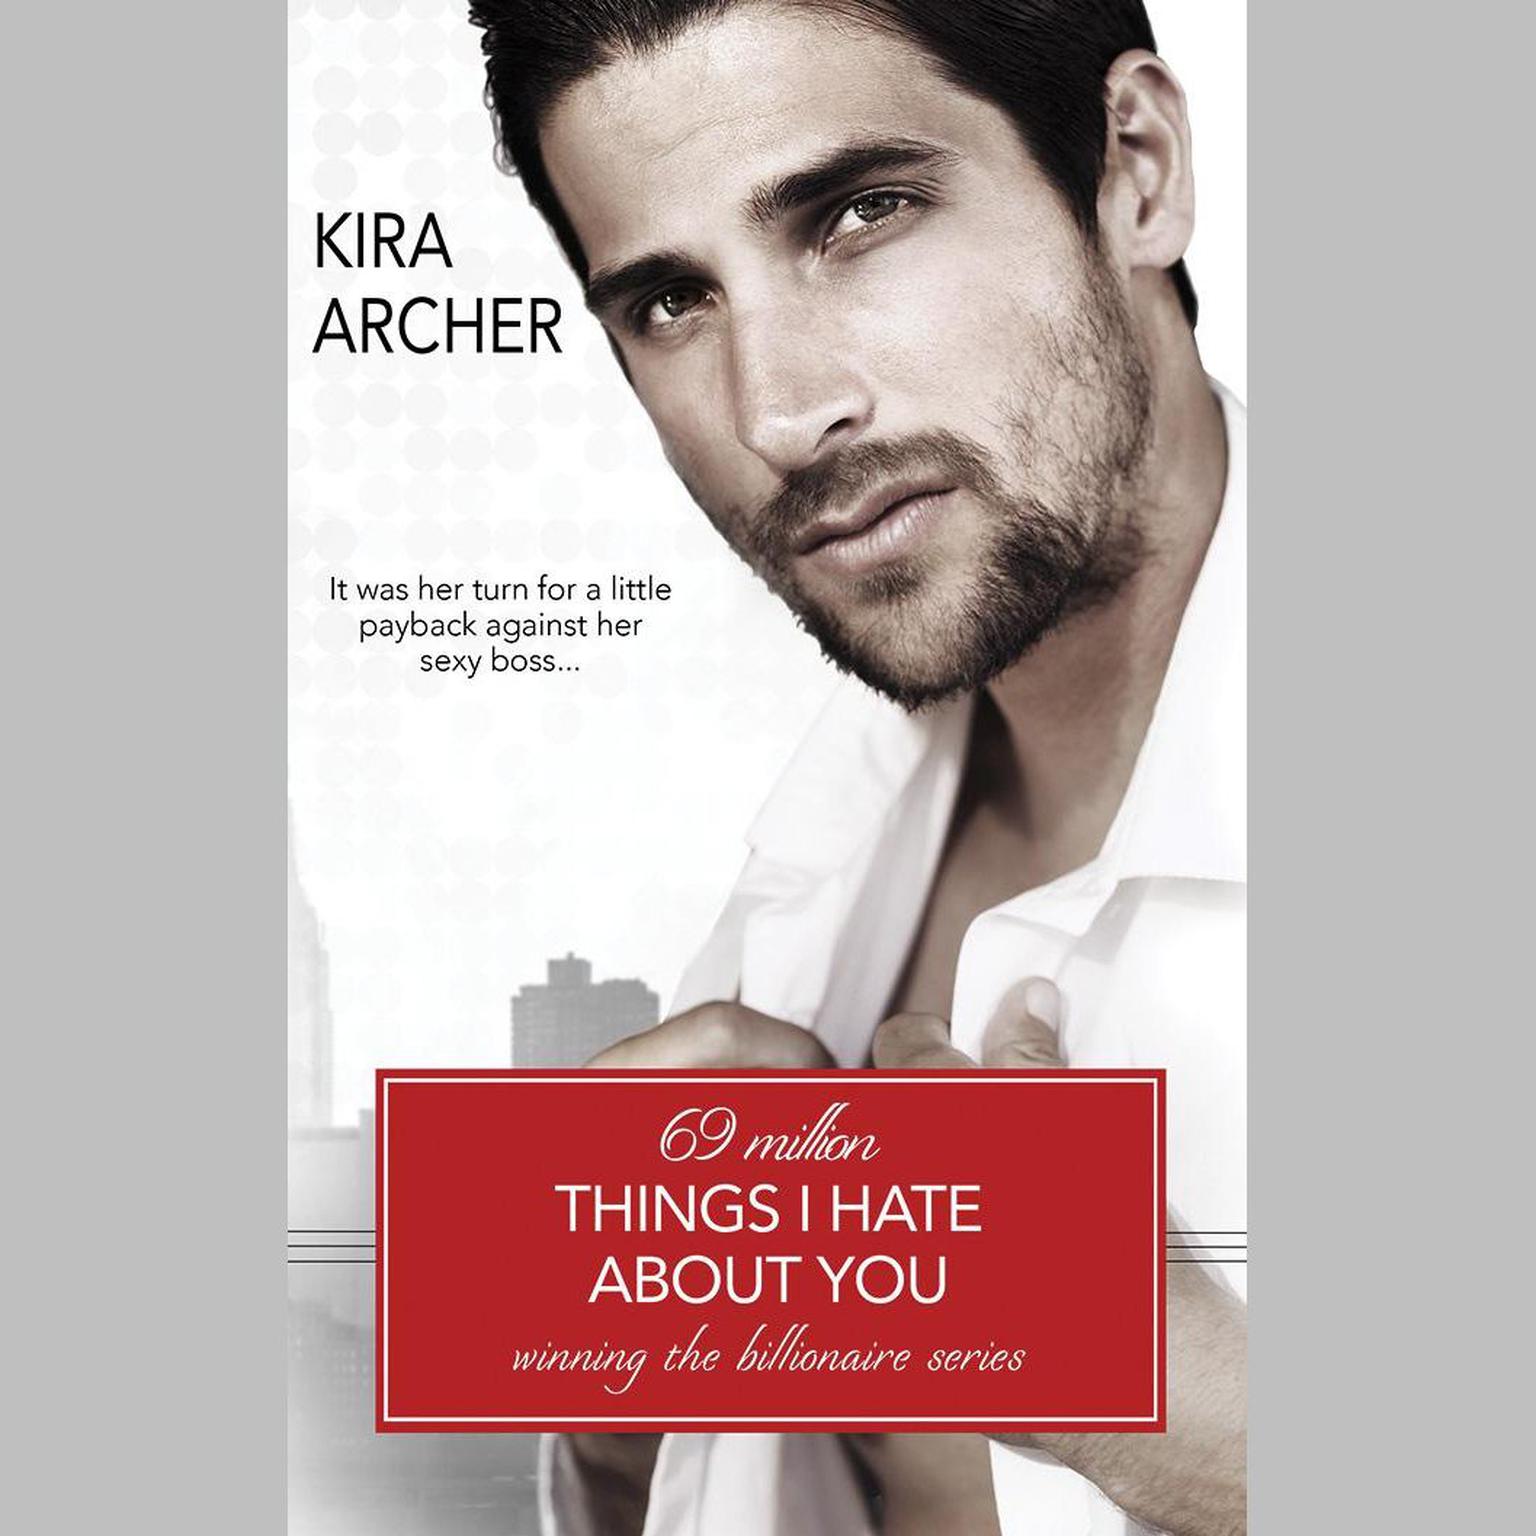 69 Million Things I Hate About You Audiobook, by Kira Archer